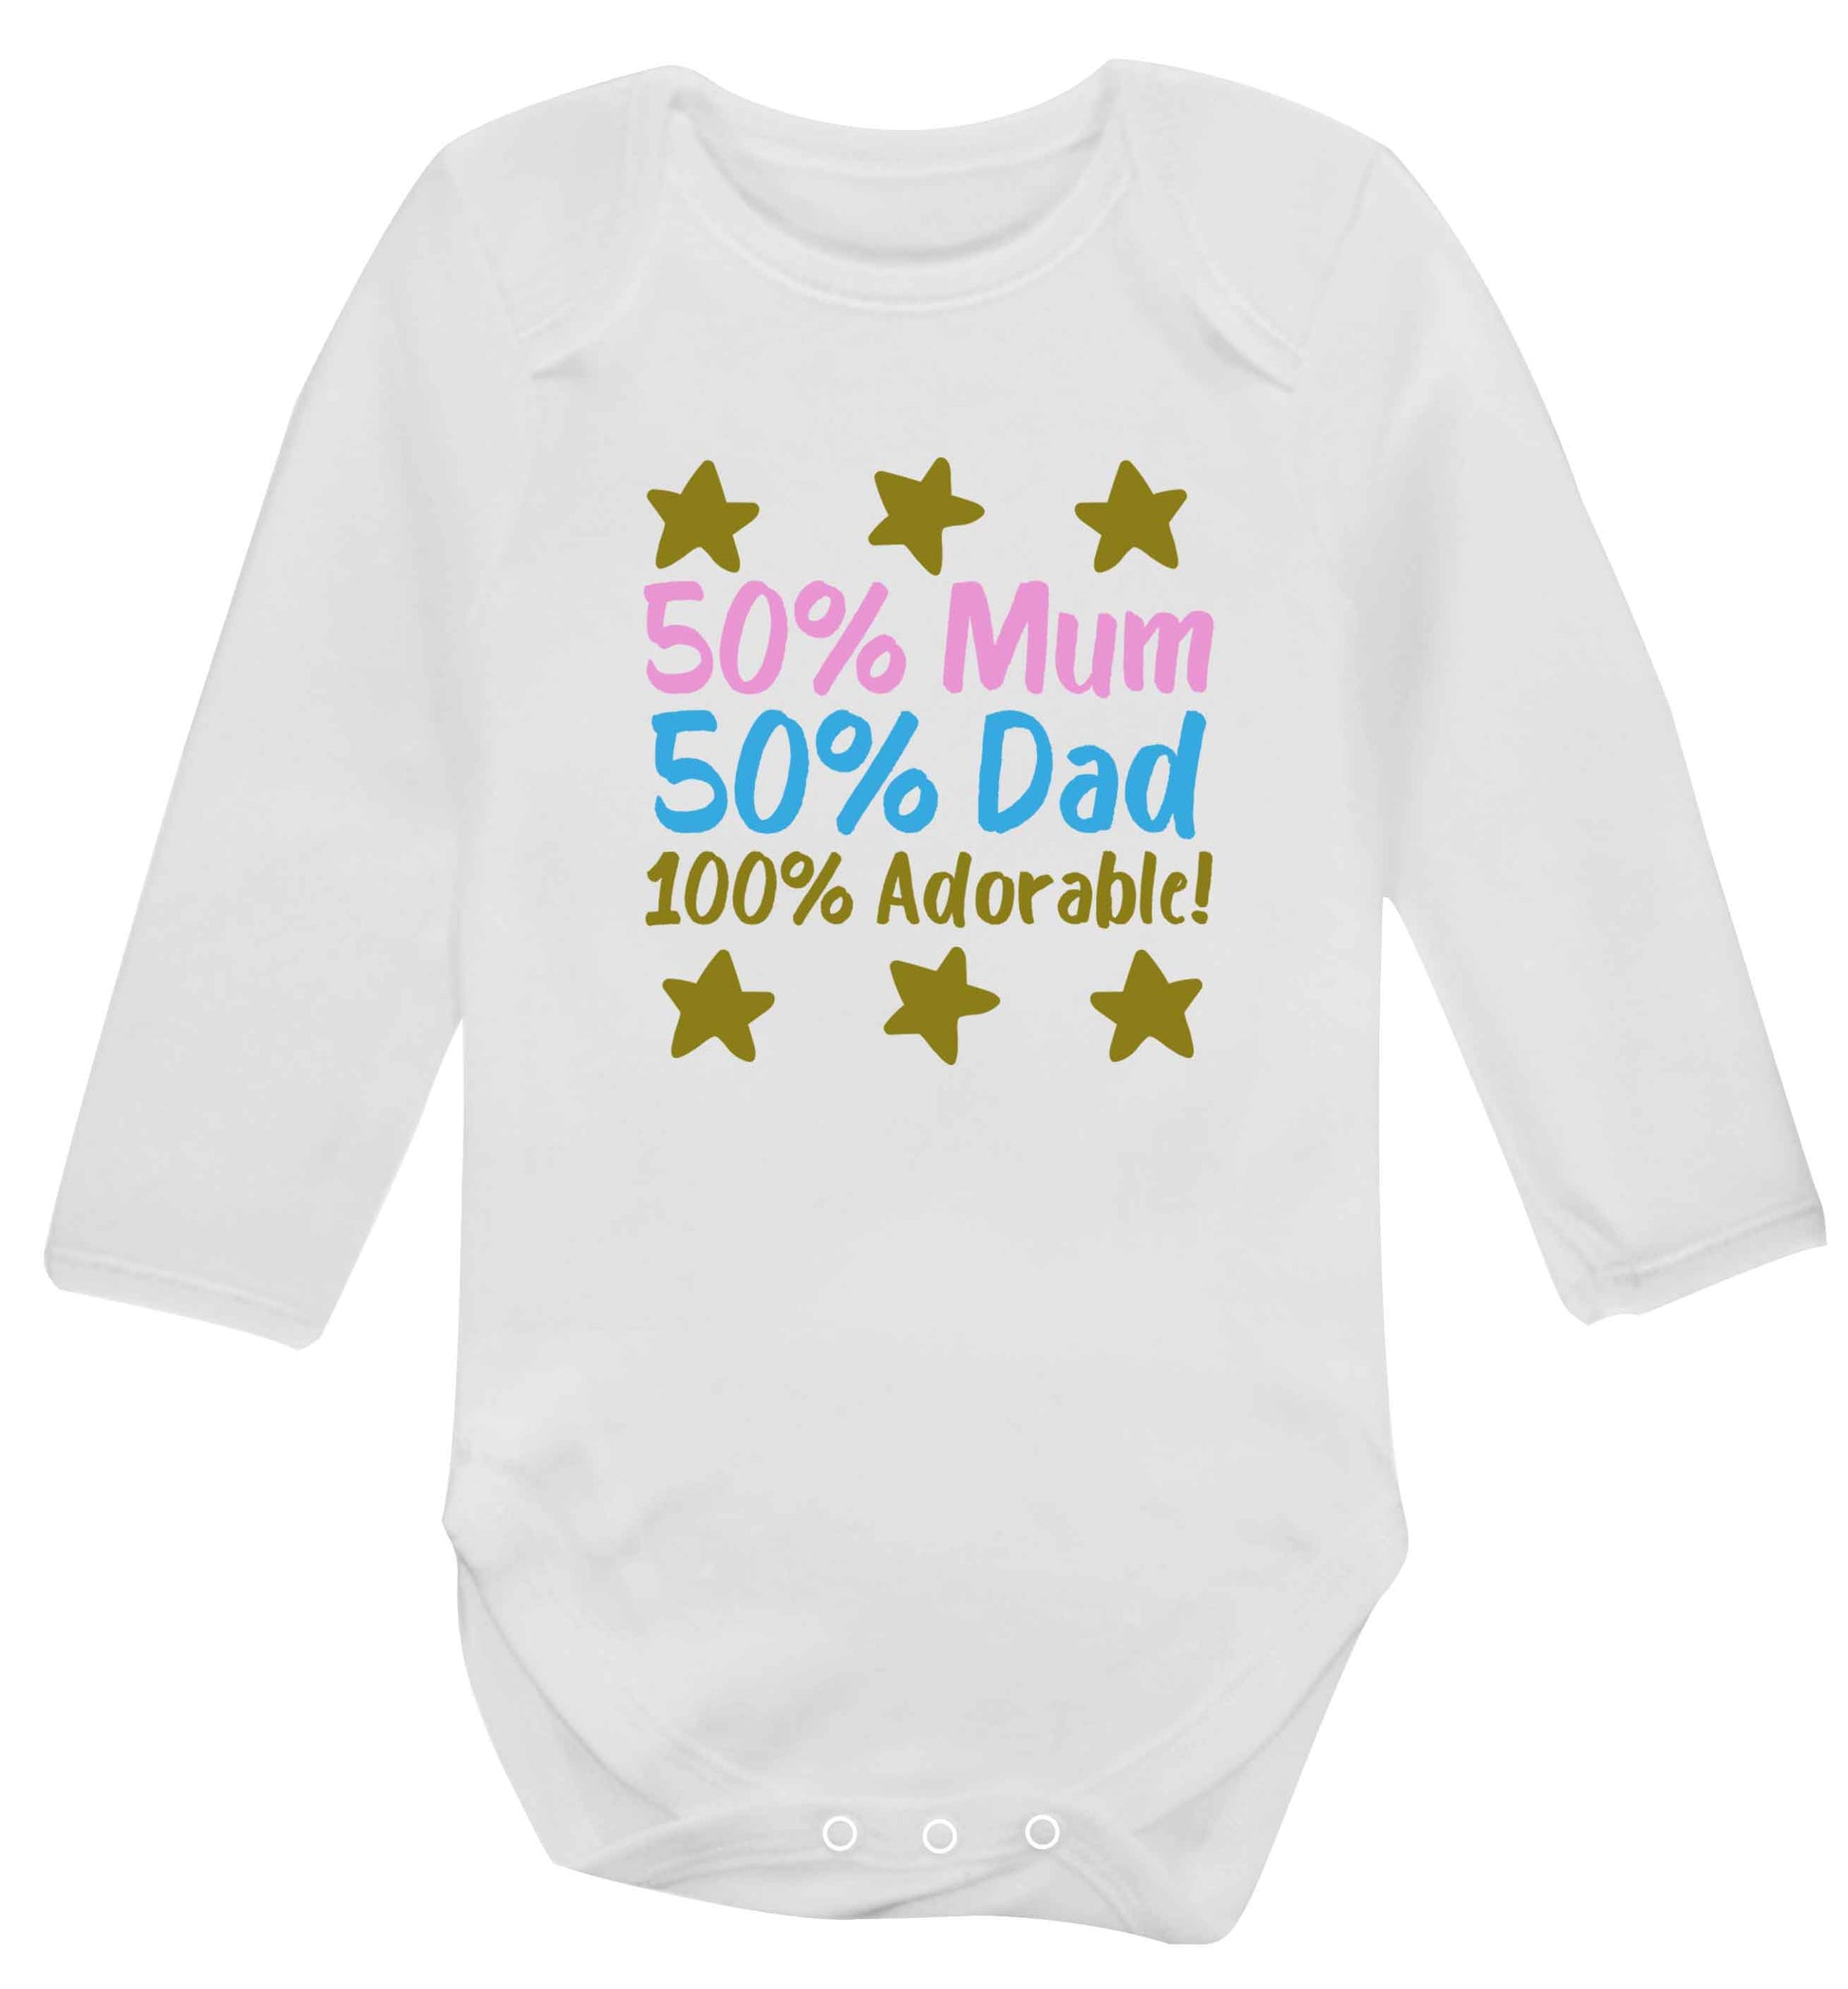 50% mum 50% dad 100% adorable baby vest long sleeved white 6-12 months